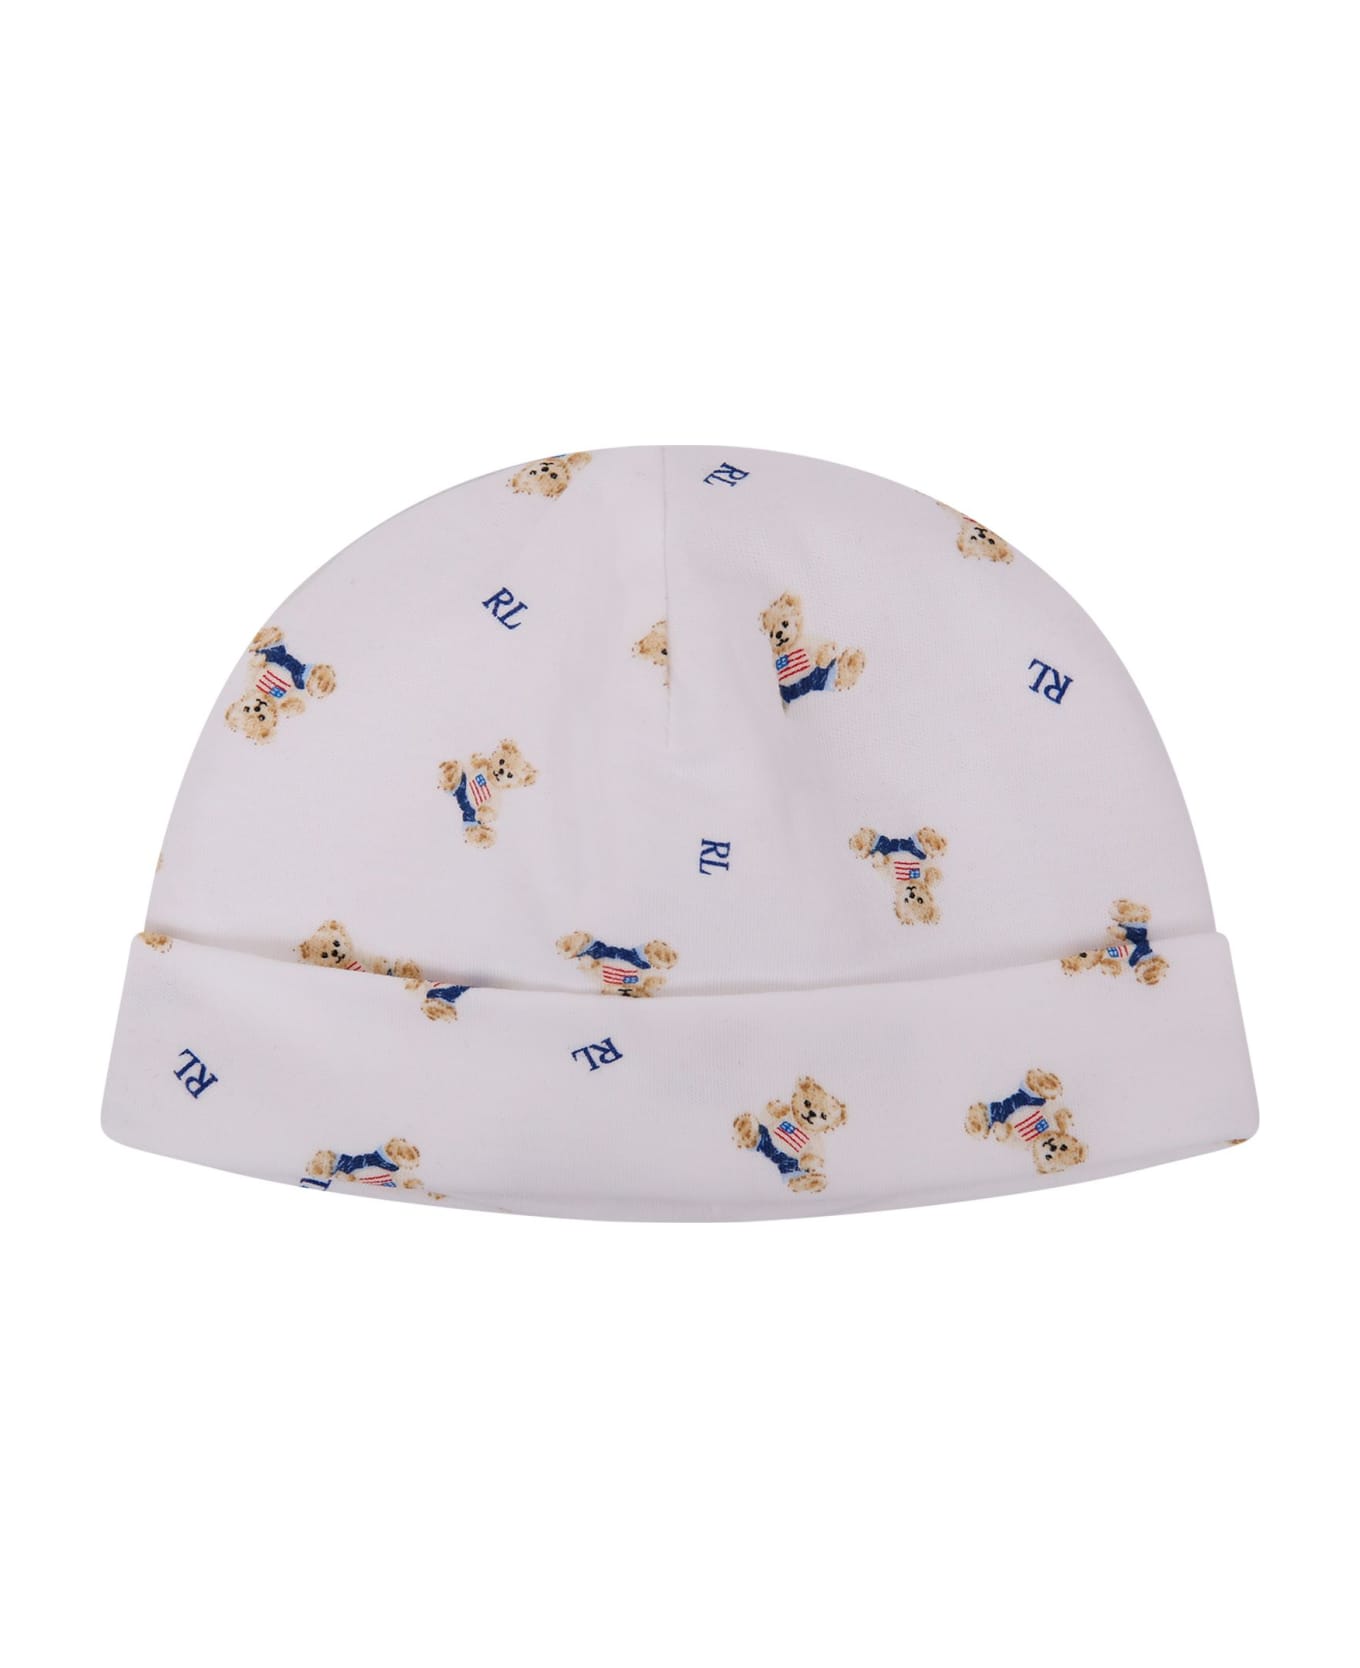 Ralph Lauren White Hat For Babyboy With Bears - White アクセサリー＆ギフト